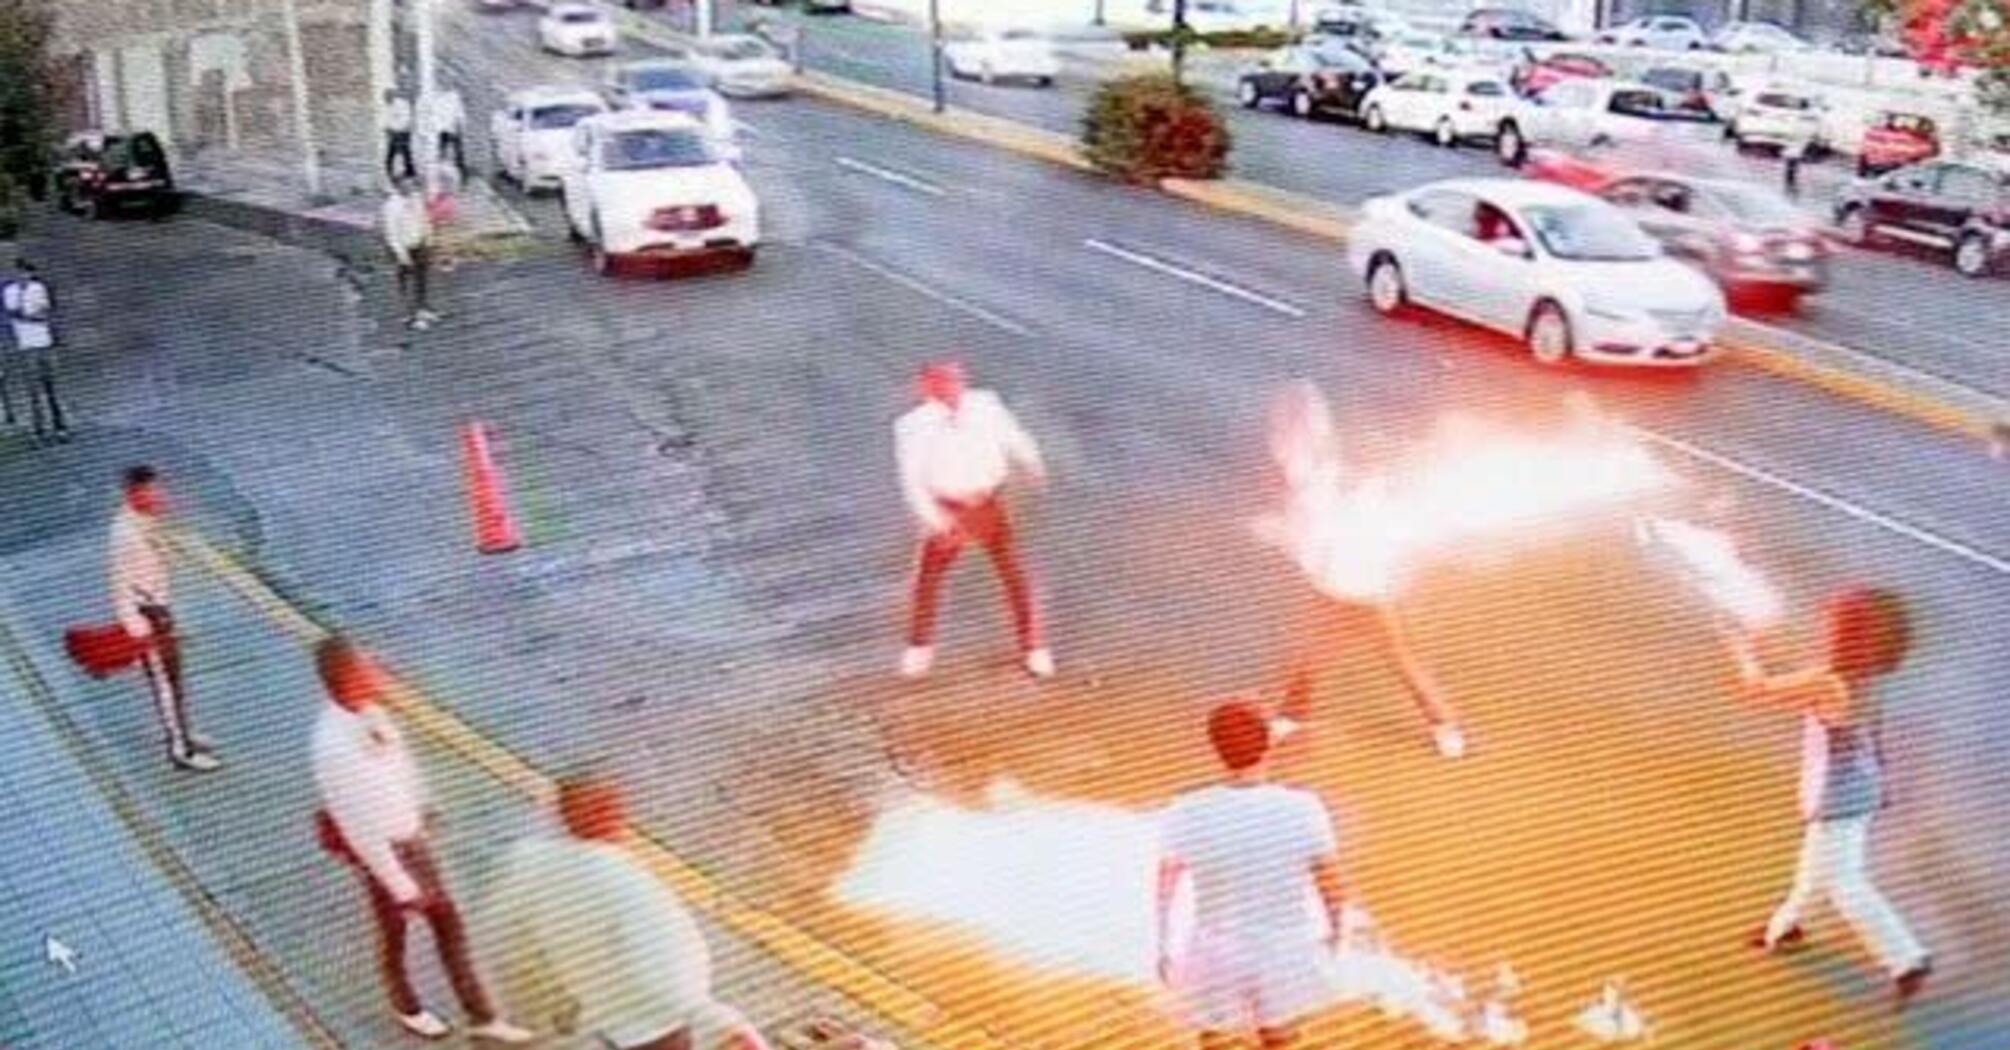  A fire-breather defends street corner against mariachi band